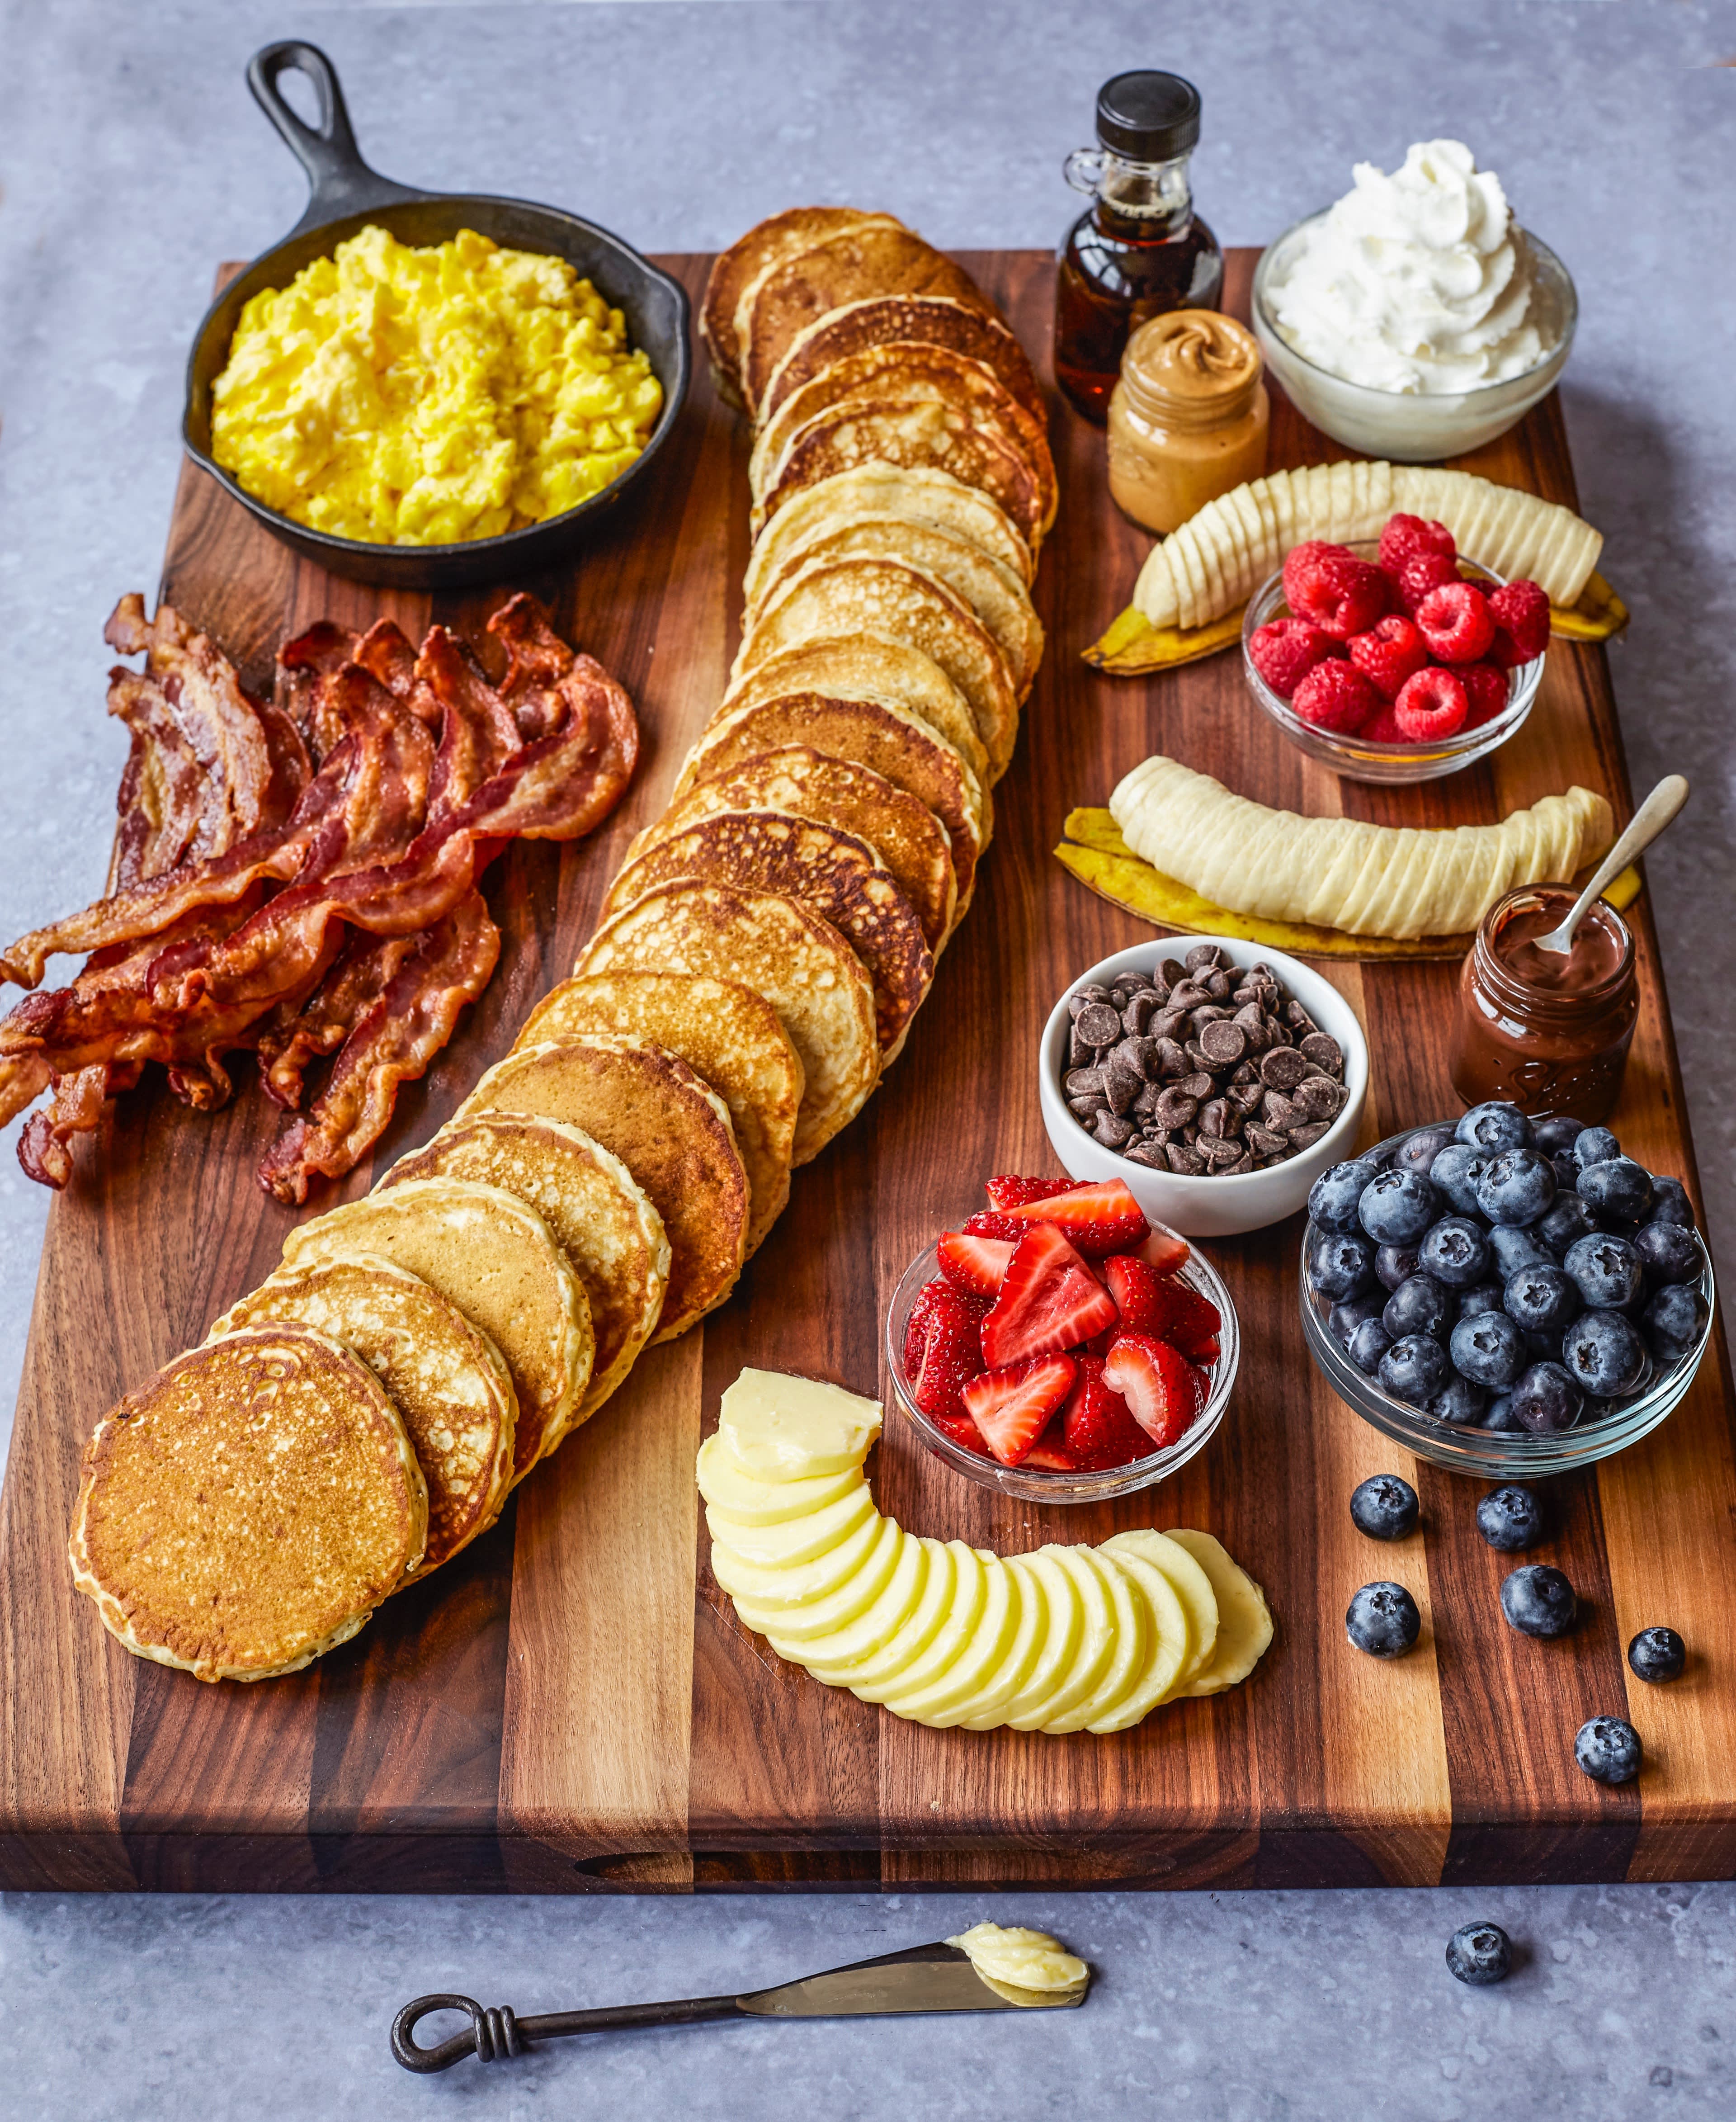 Brunch Spread with Friends - The BakerMama